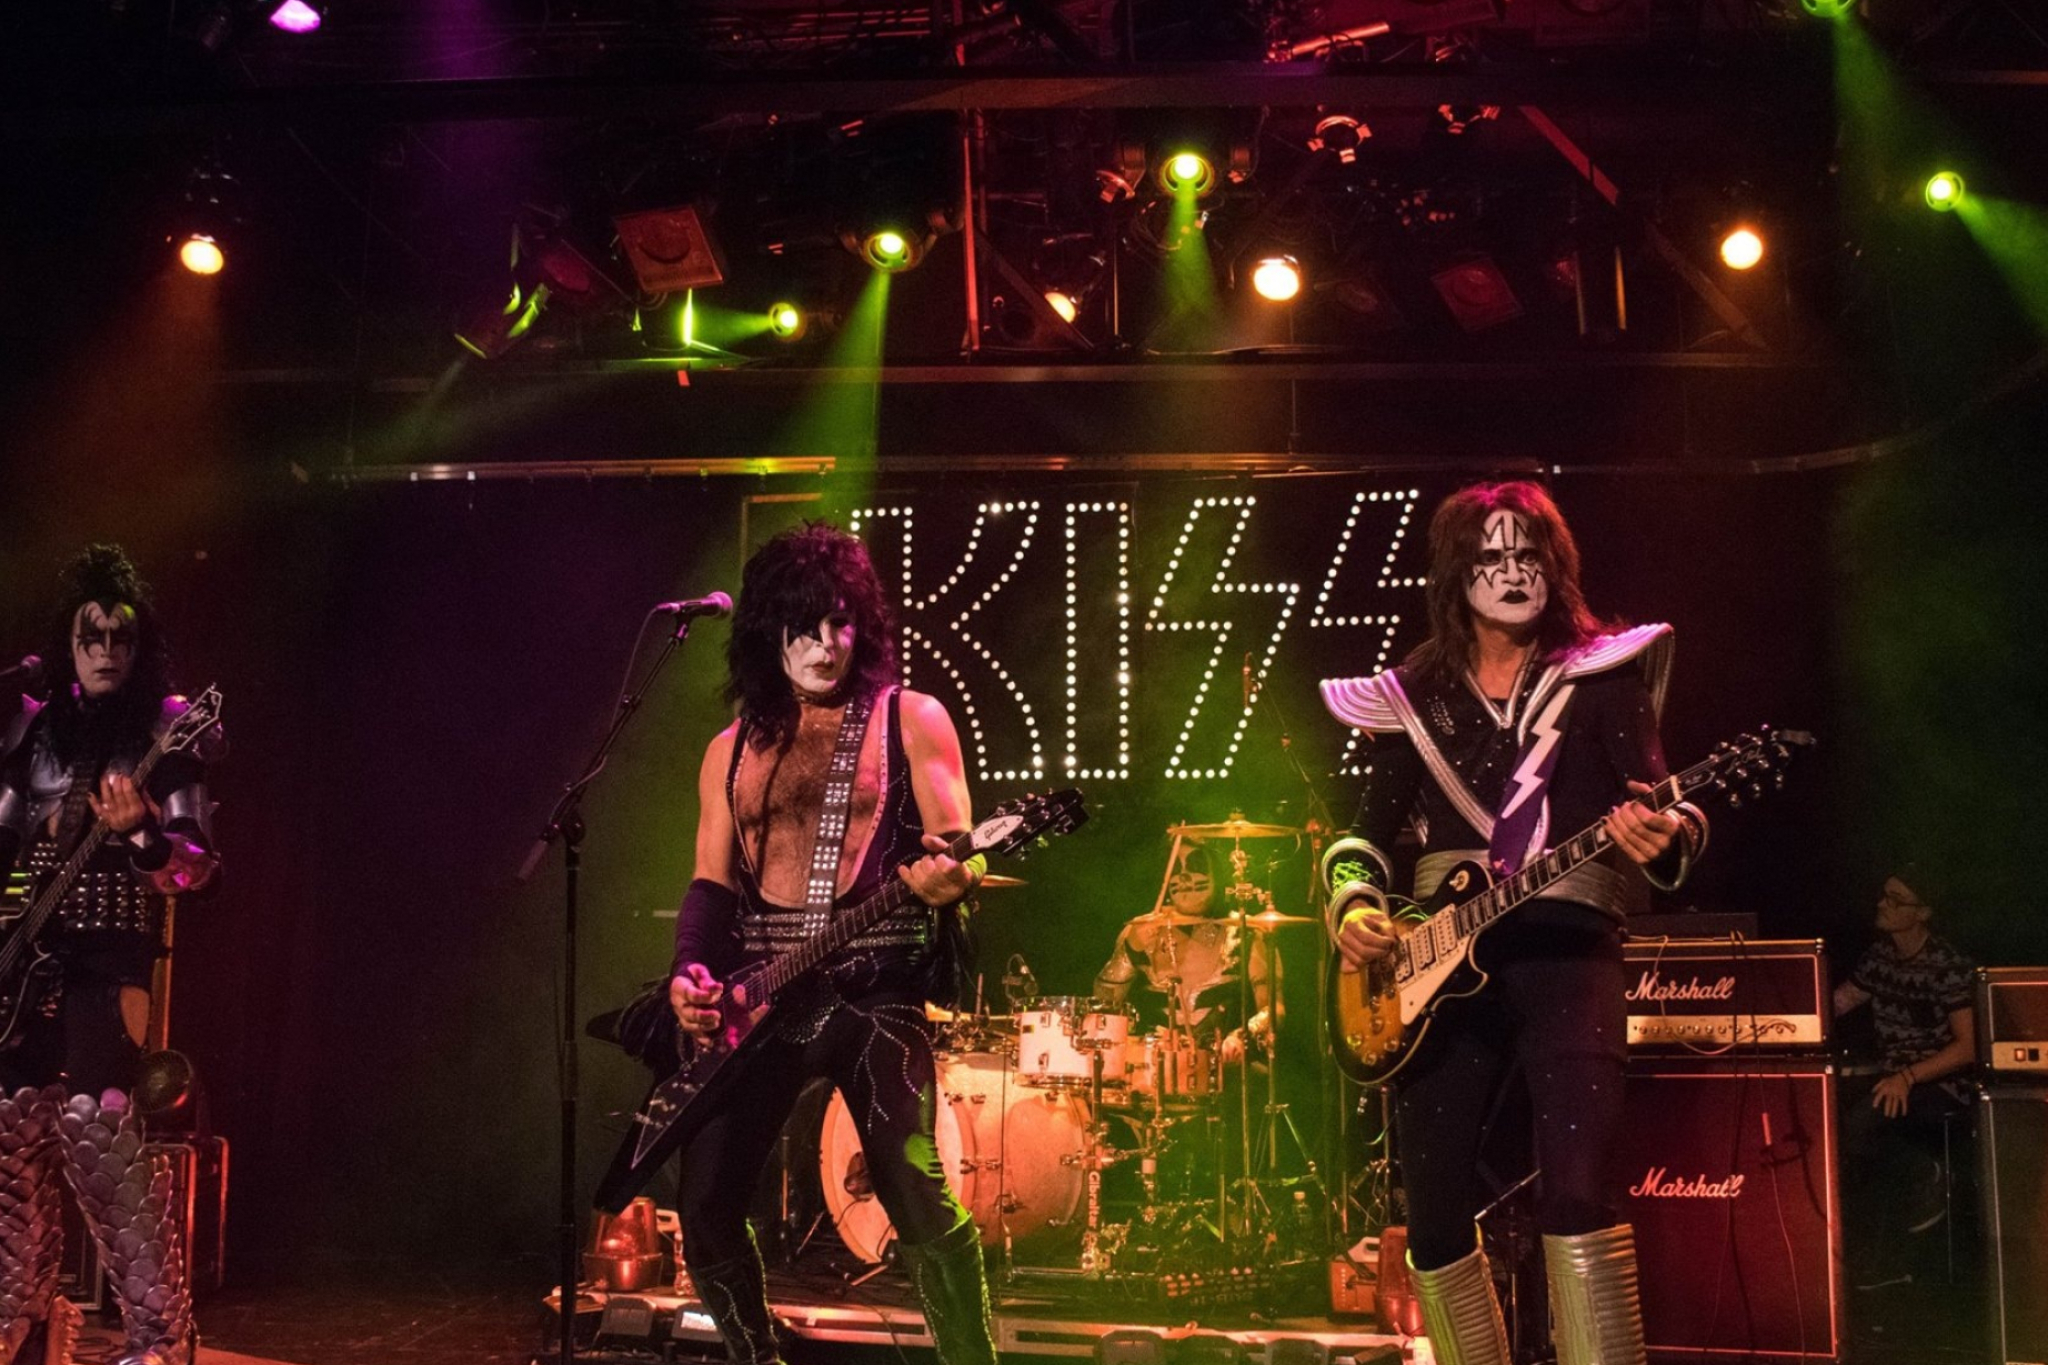 Rob Valentine with KISS tribute bands - Photos 2050x1370